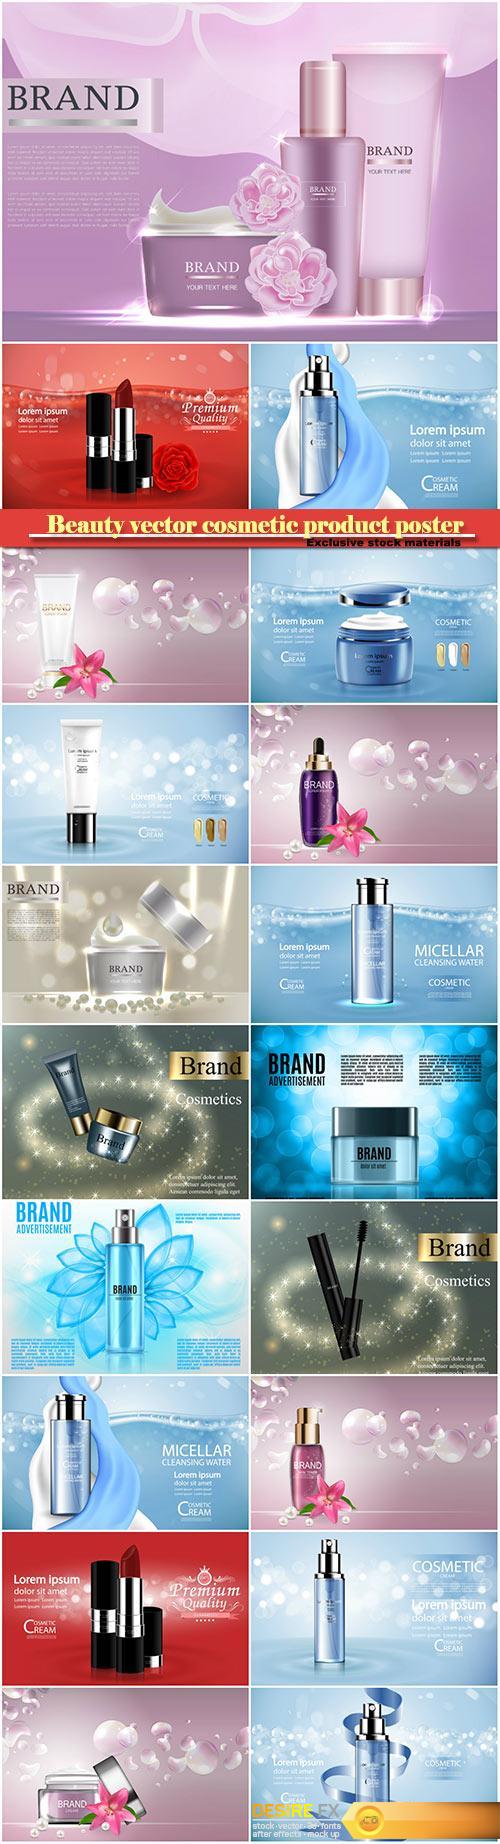 Beauty vector cosmetic product poster # 14